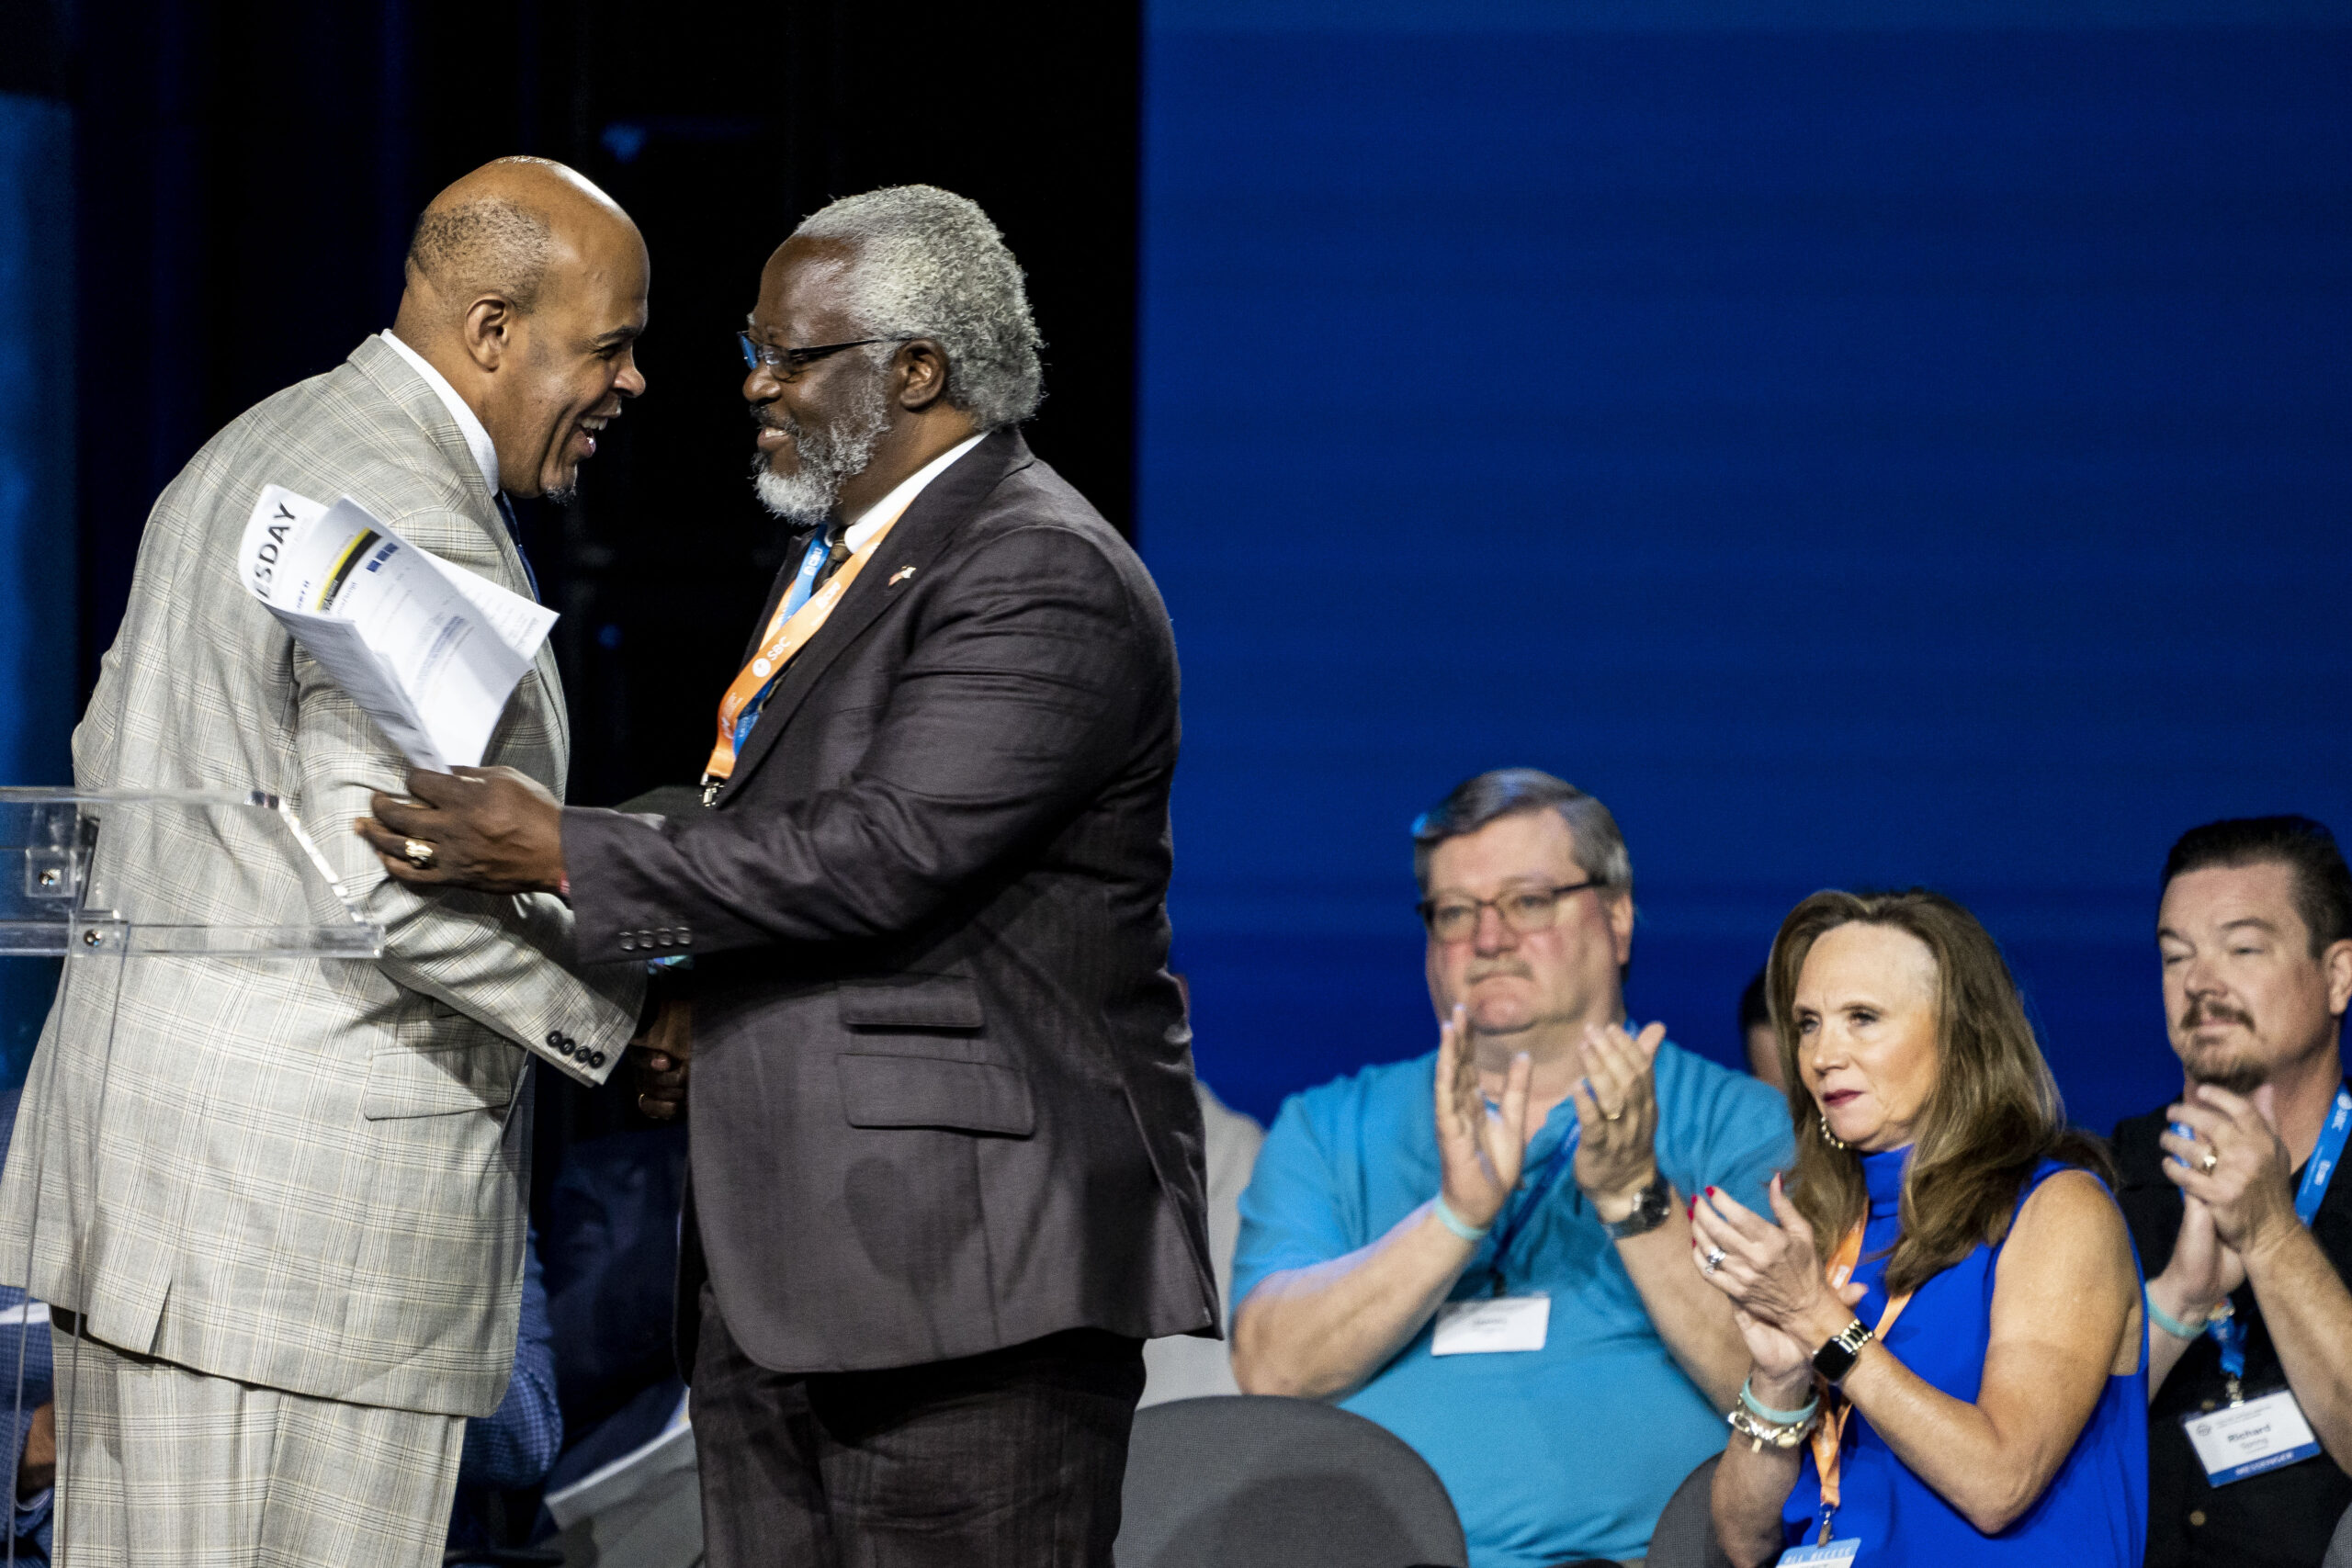 Willie D. McLaurin welcomes Rolland Slade to the podium at the Southern Baptist Convention annual meeting, held at the Anaheim Convention Center in Anaheim, California, on Wednesday, June 15, 2022. Photo by Justin L. Stewart/Religion News Service